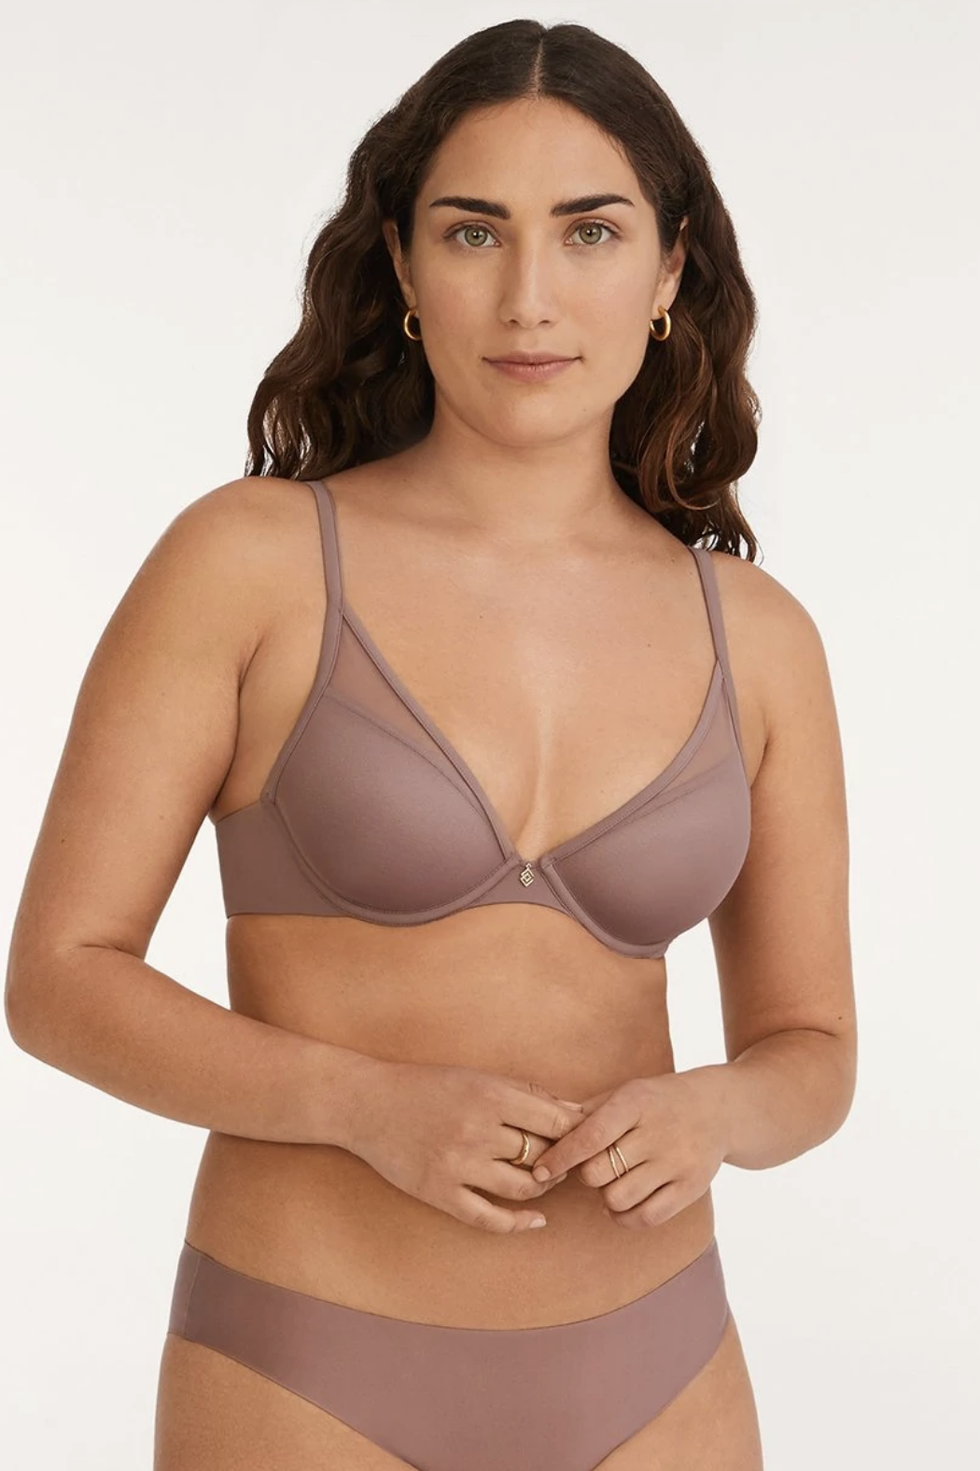 This company designed a bra for women with asymmetrical boobs